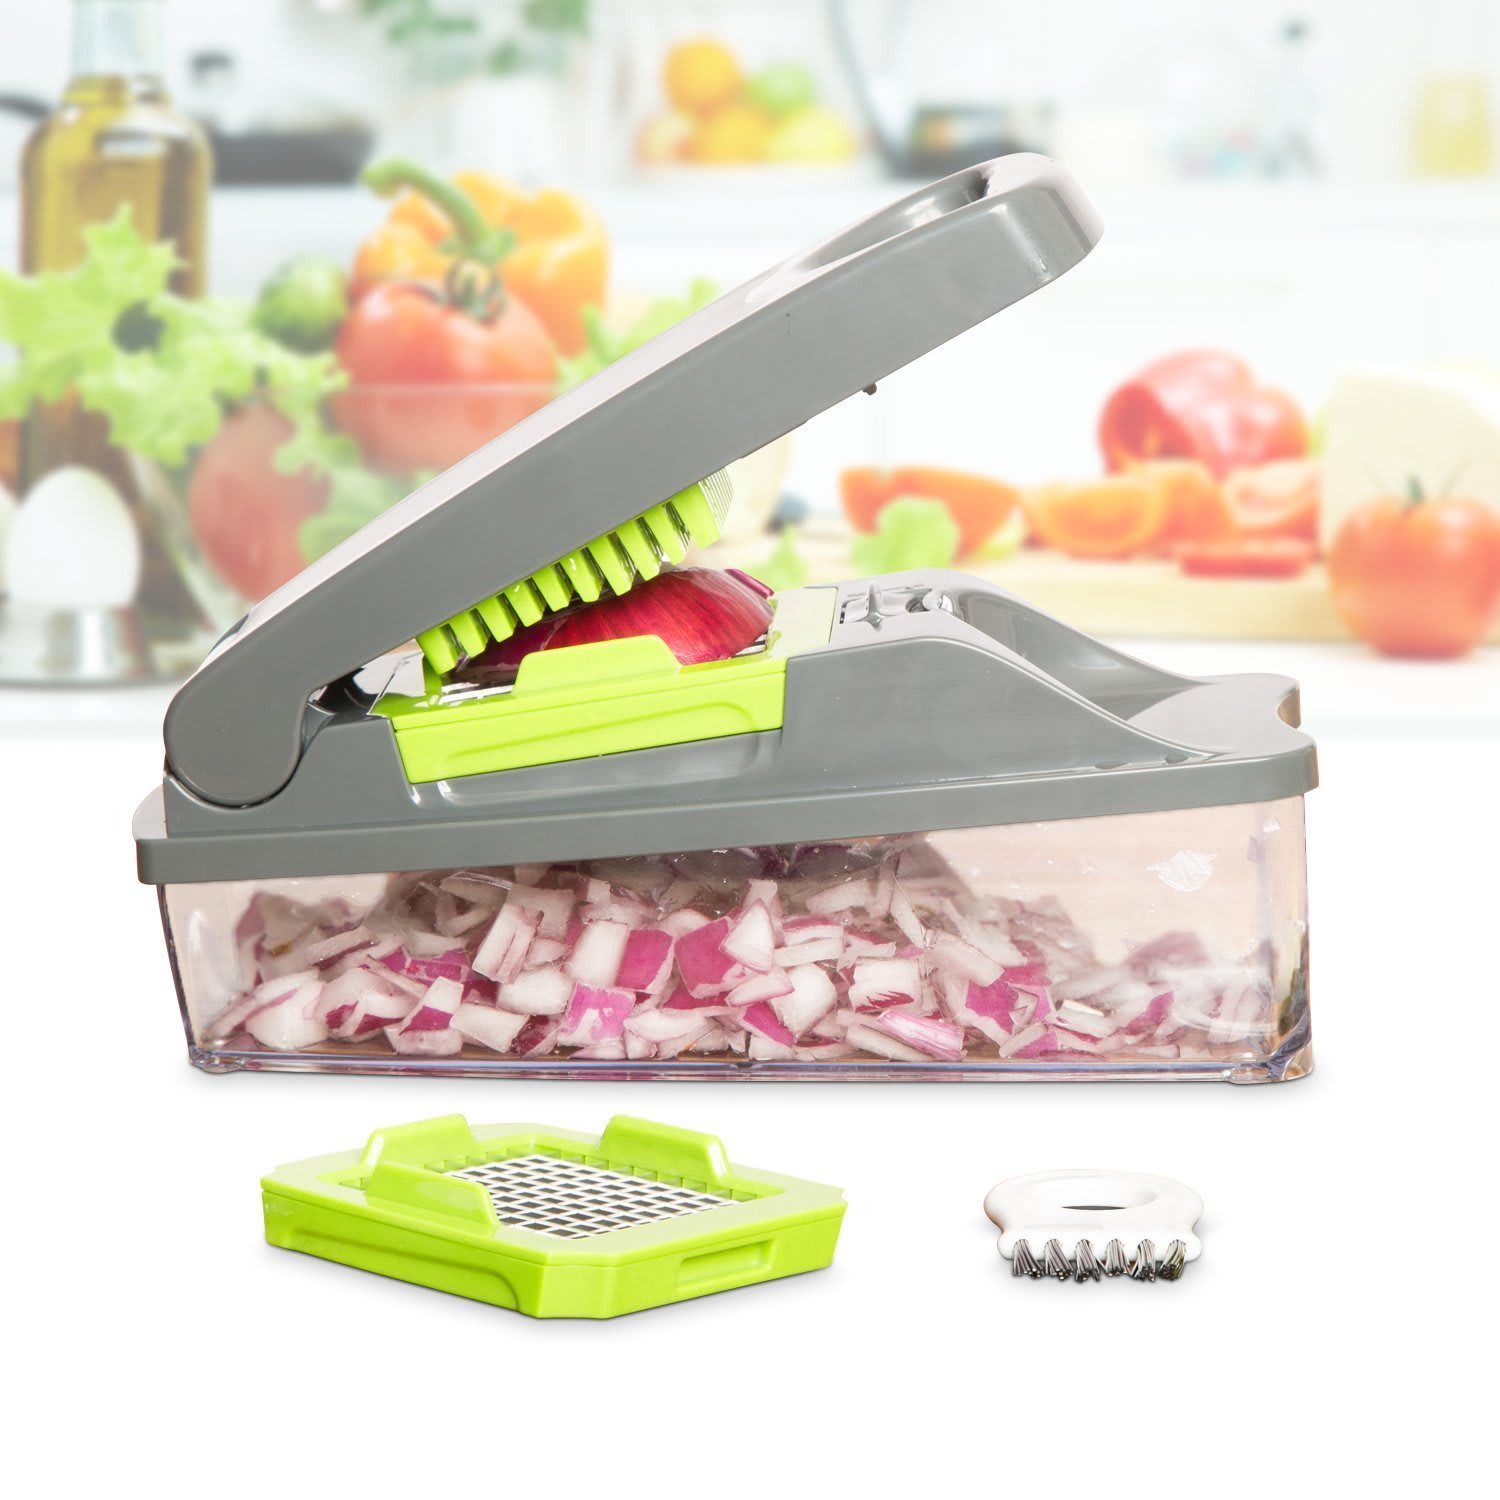 Best Onion Choppers: Top 5 Picks - The Kitchen Community